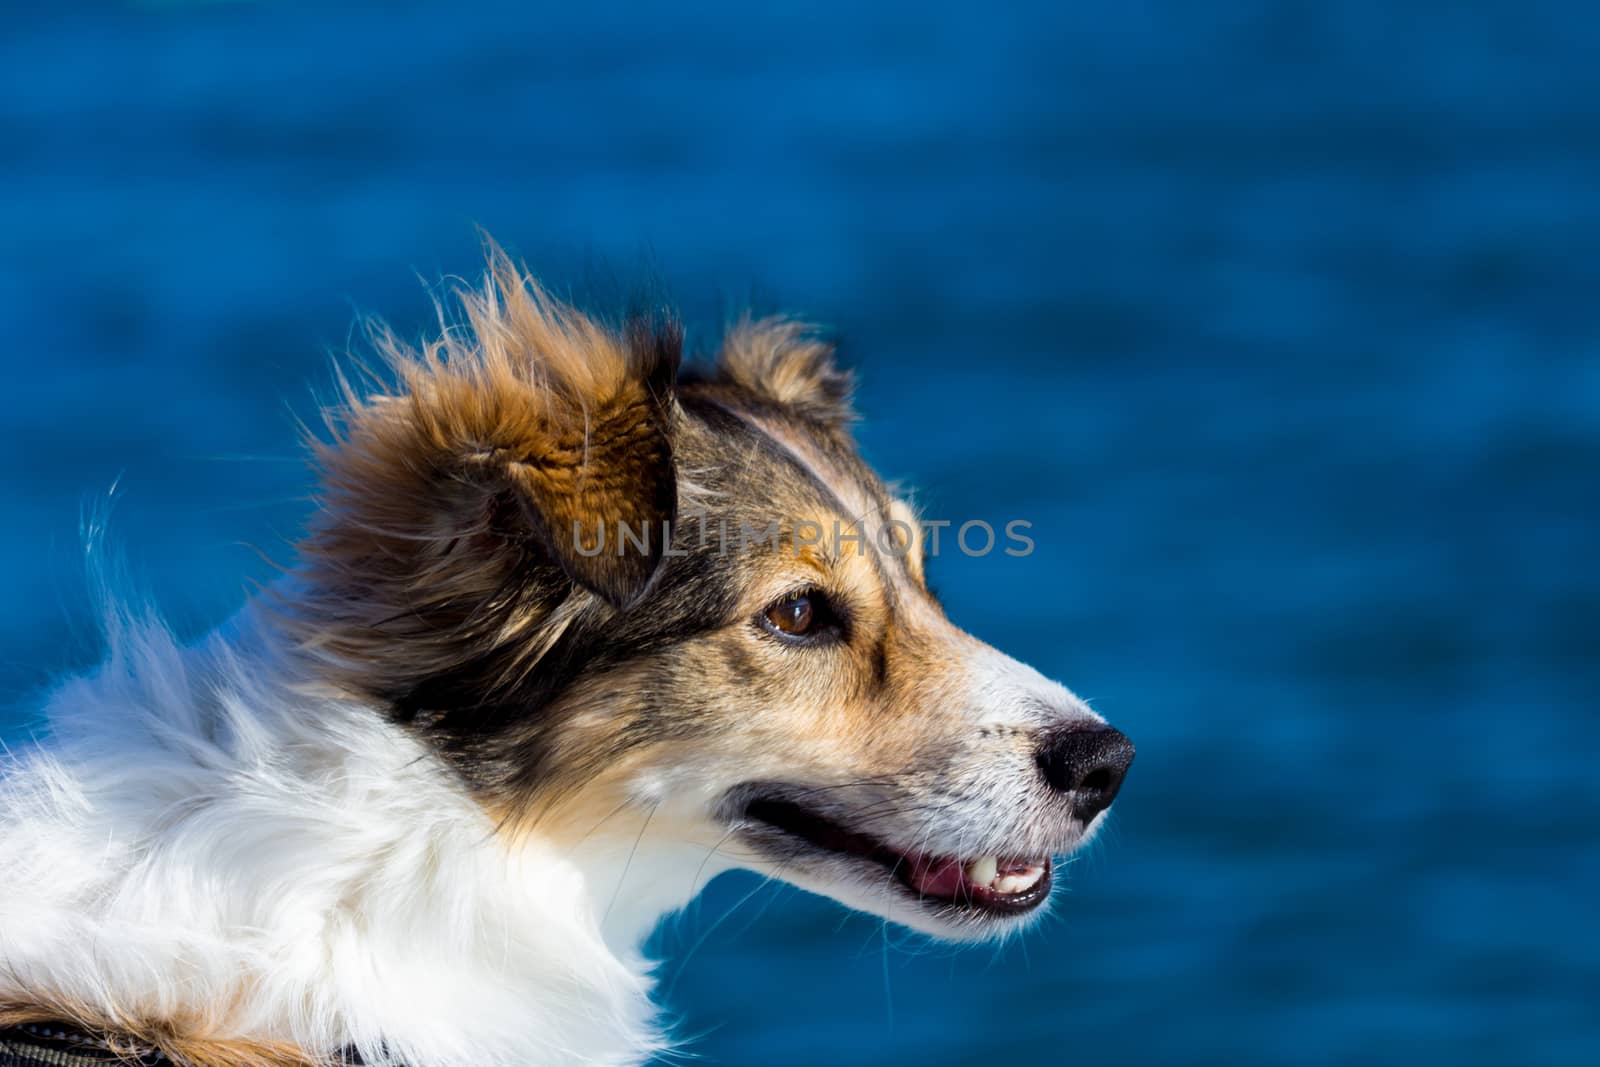 Happy dog on a boat  in a windy day